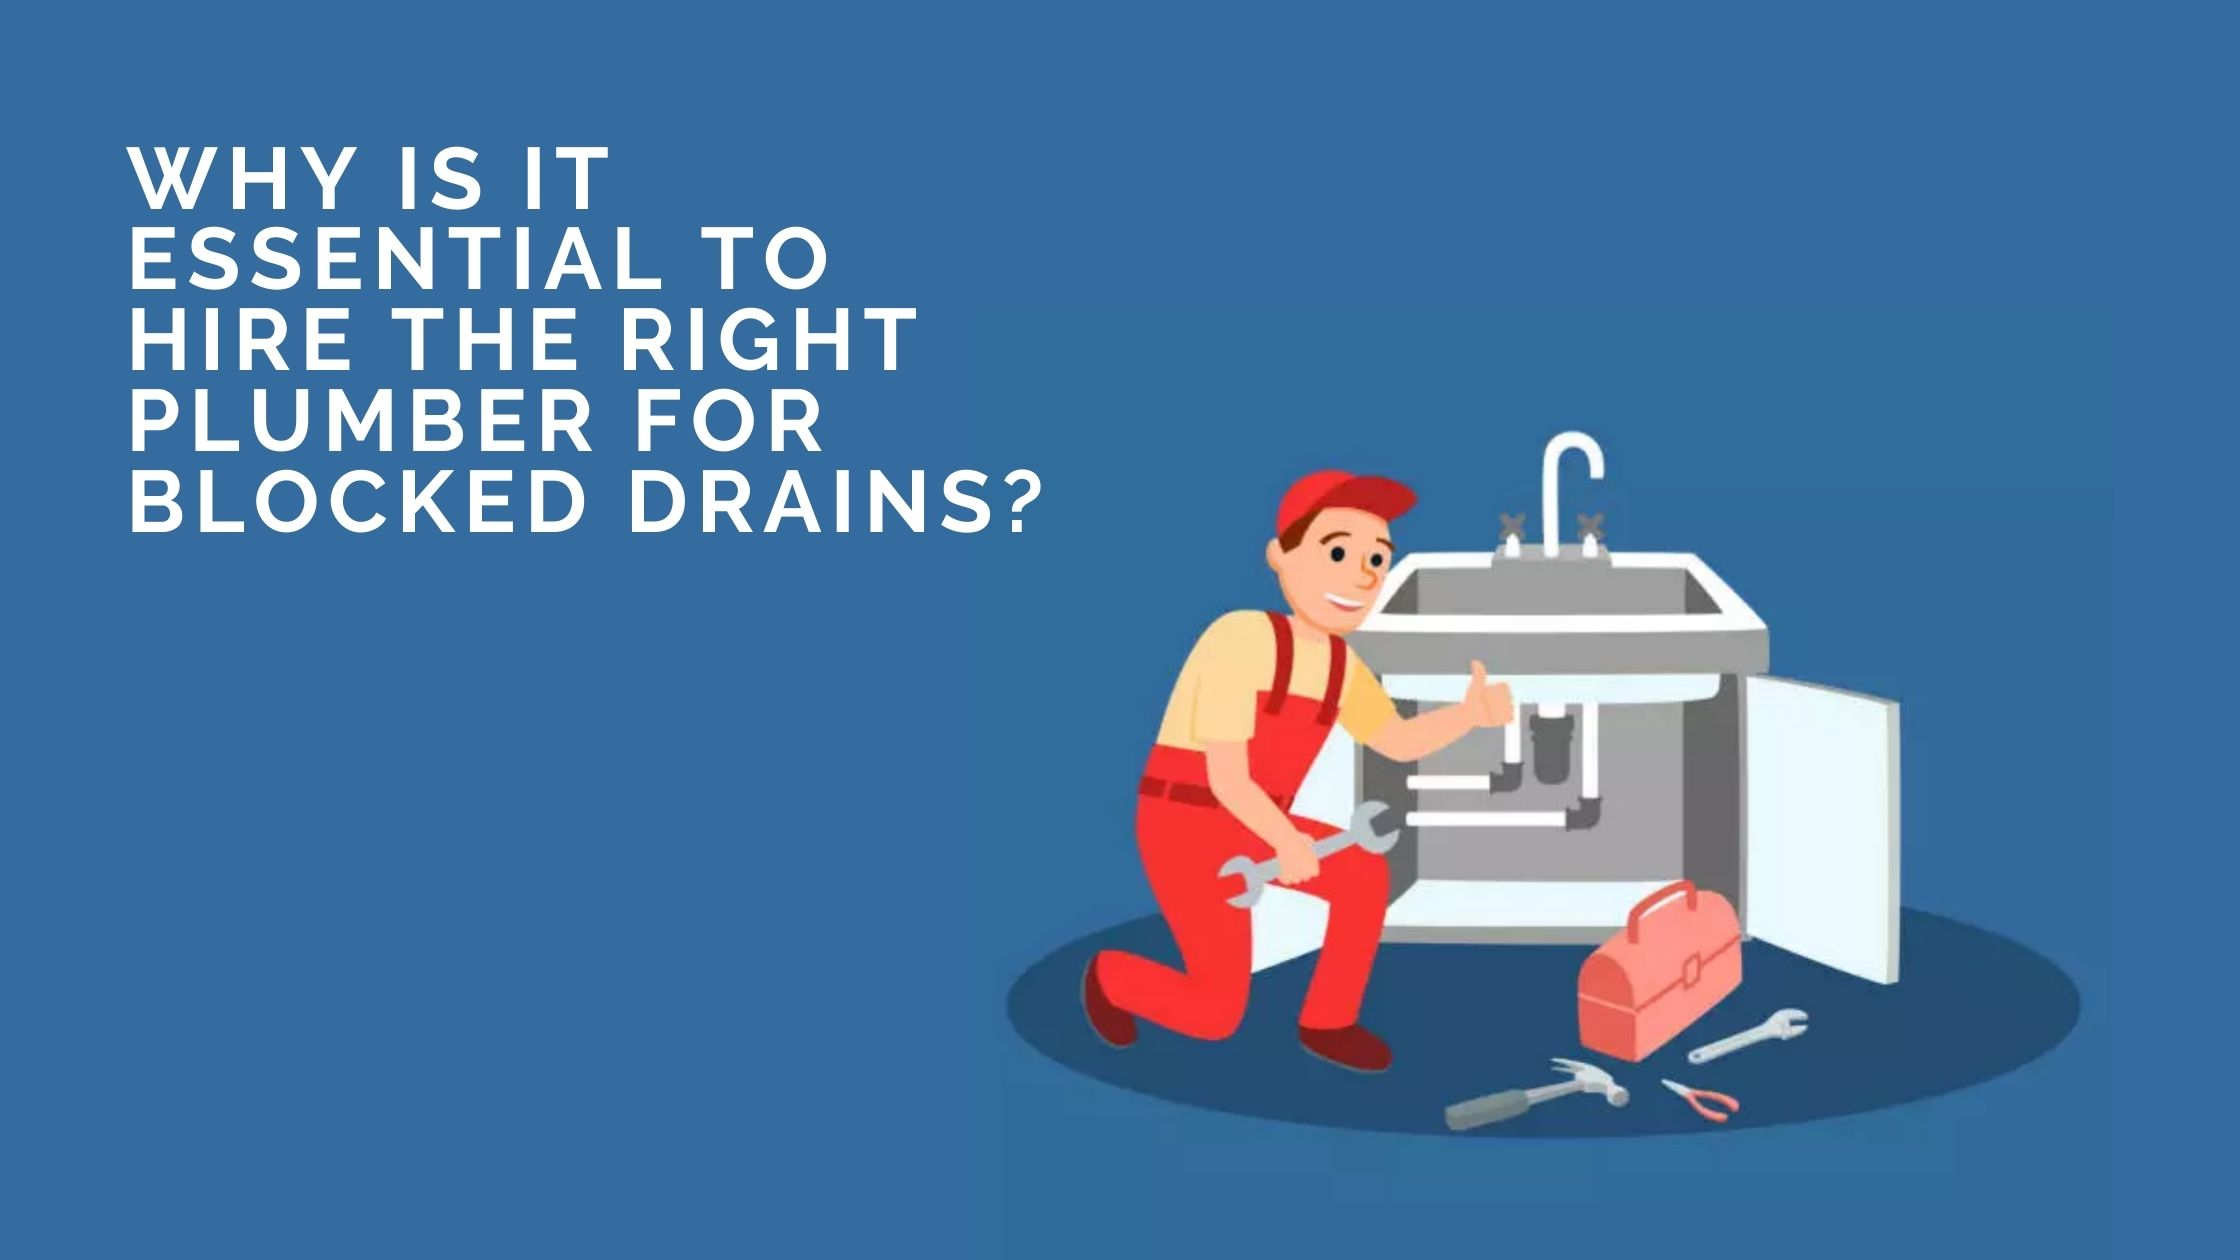 Why Is It Essential To Hire The Right Plumber For Blocked Drains?